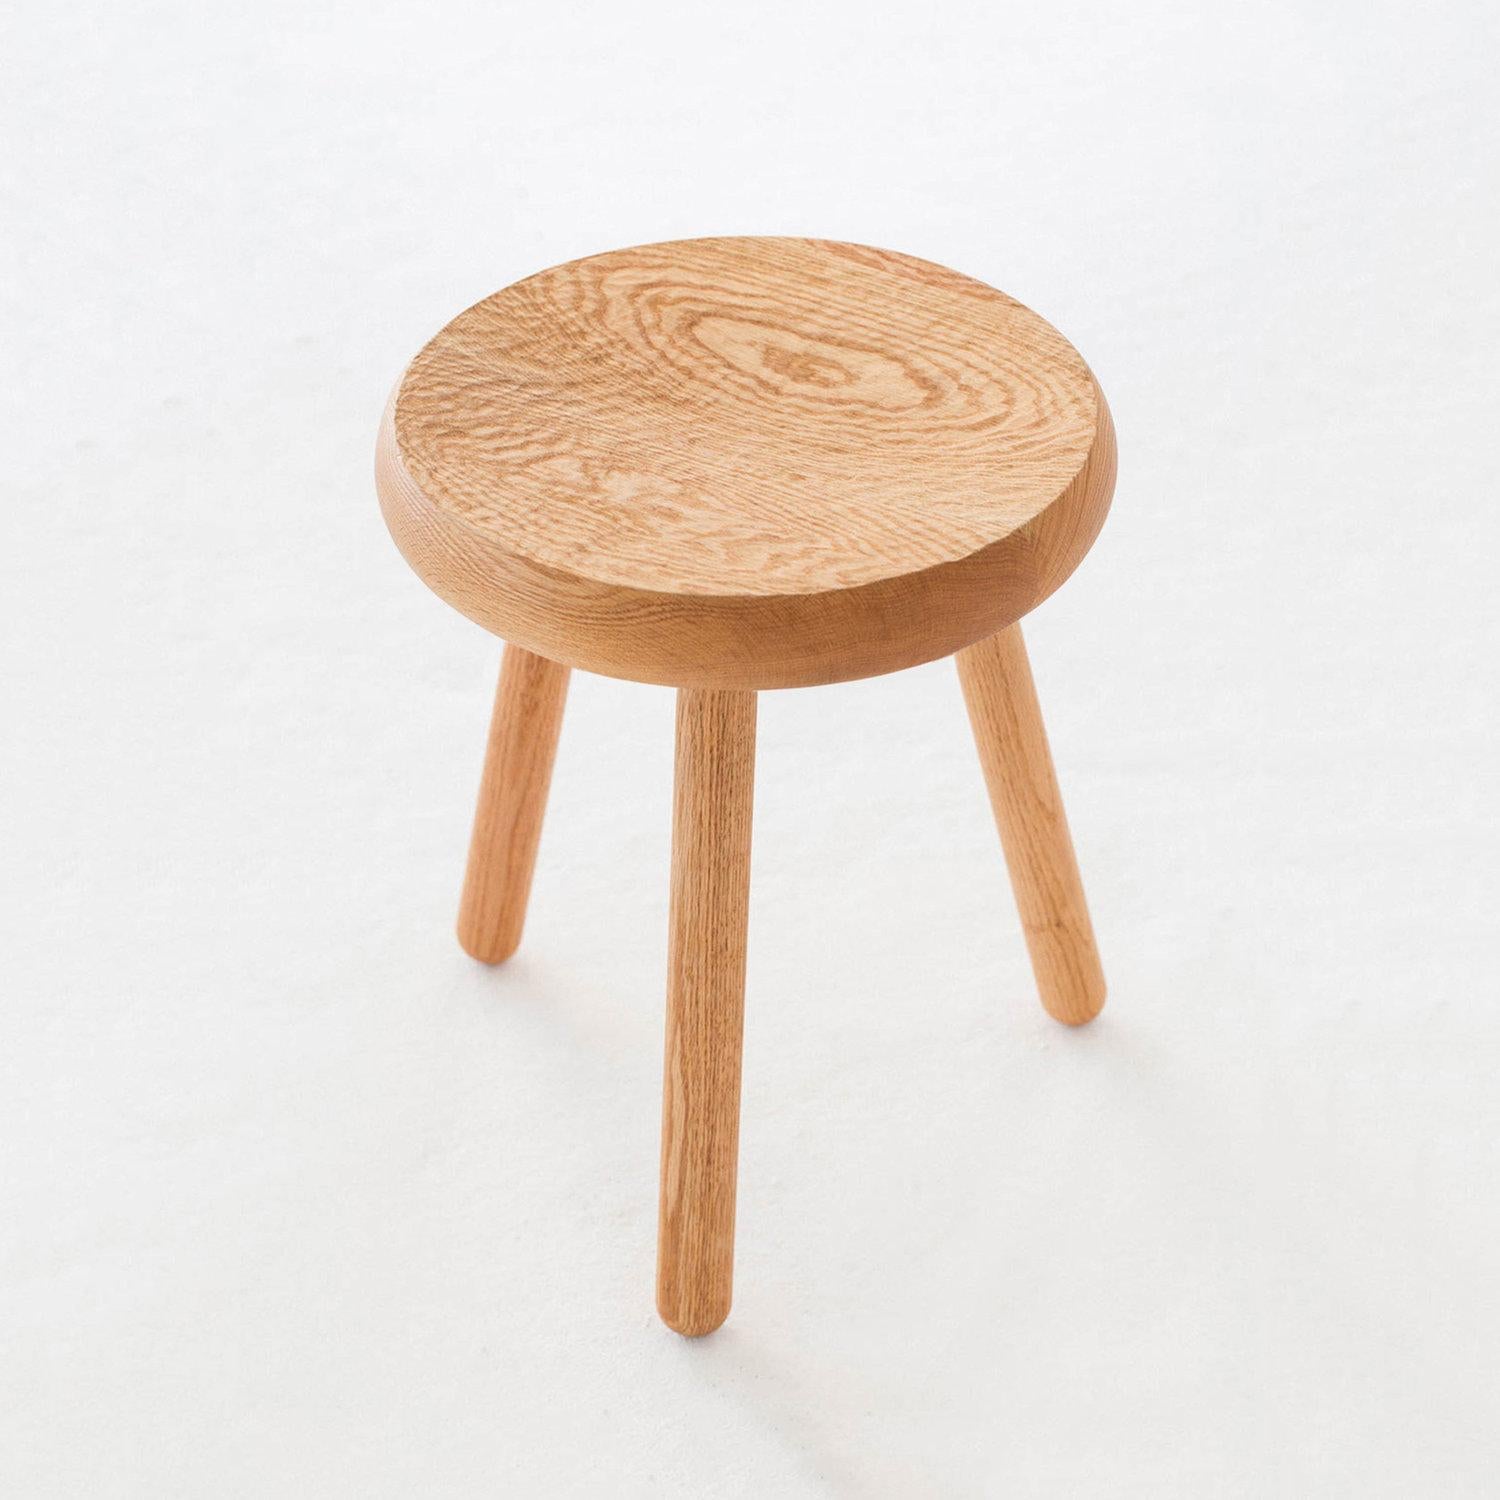 A versatile piece of furniture, the Dibbet Stool functions as an extra seat, ottoman, or side table. Reminiscent of Shaker or early frontier furniture, the thick seat is hand carved with a slight concave that leaves a tactile and smooth texture. The